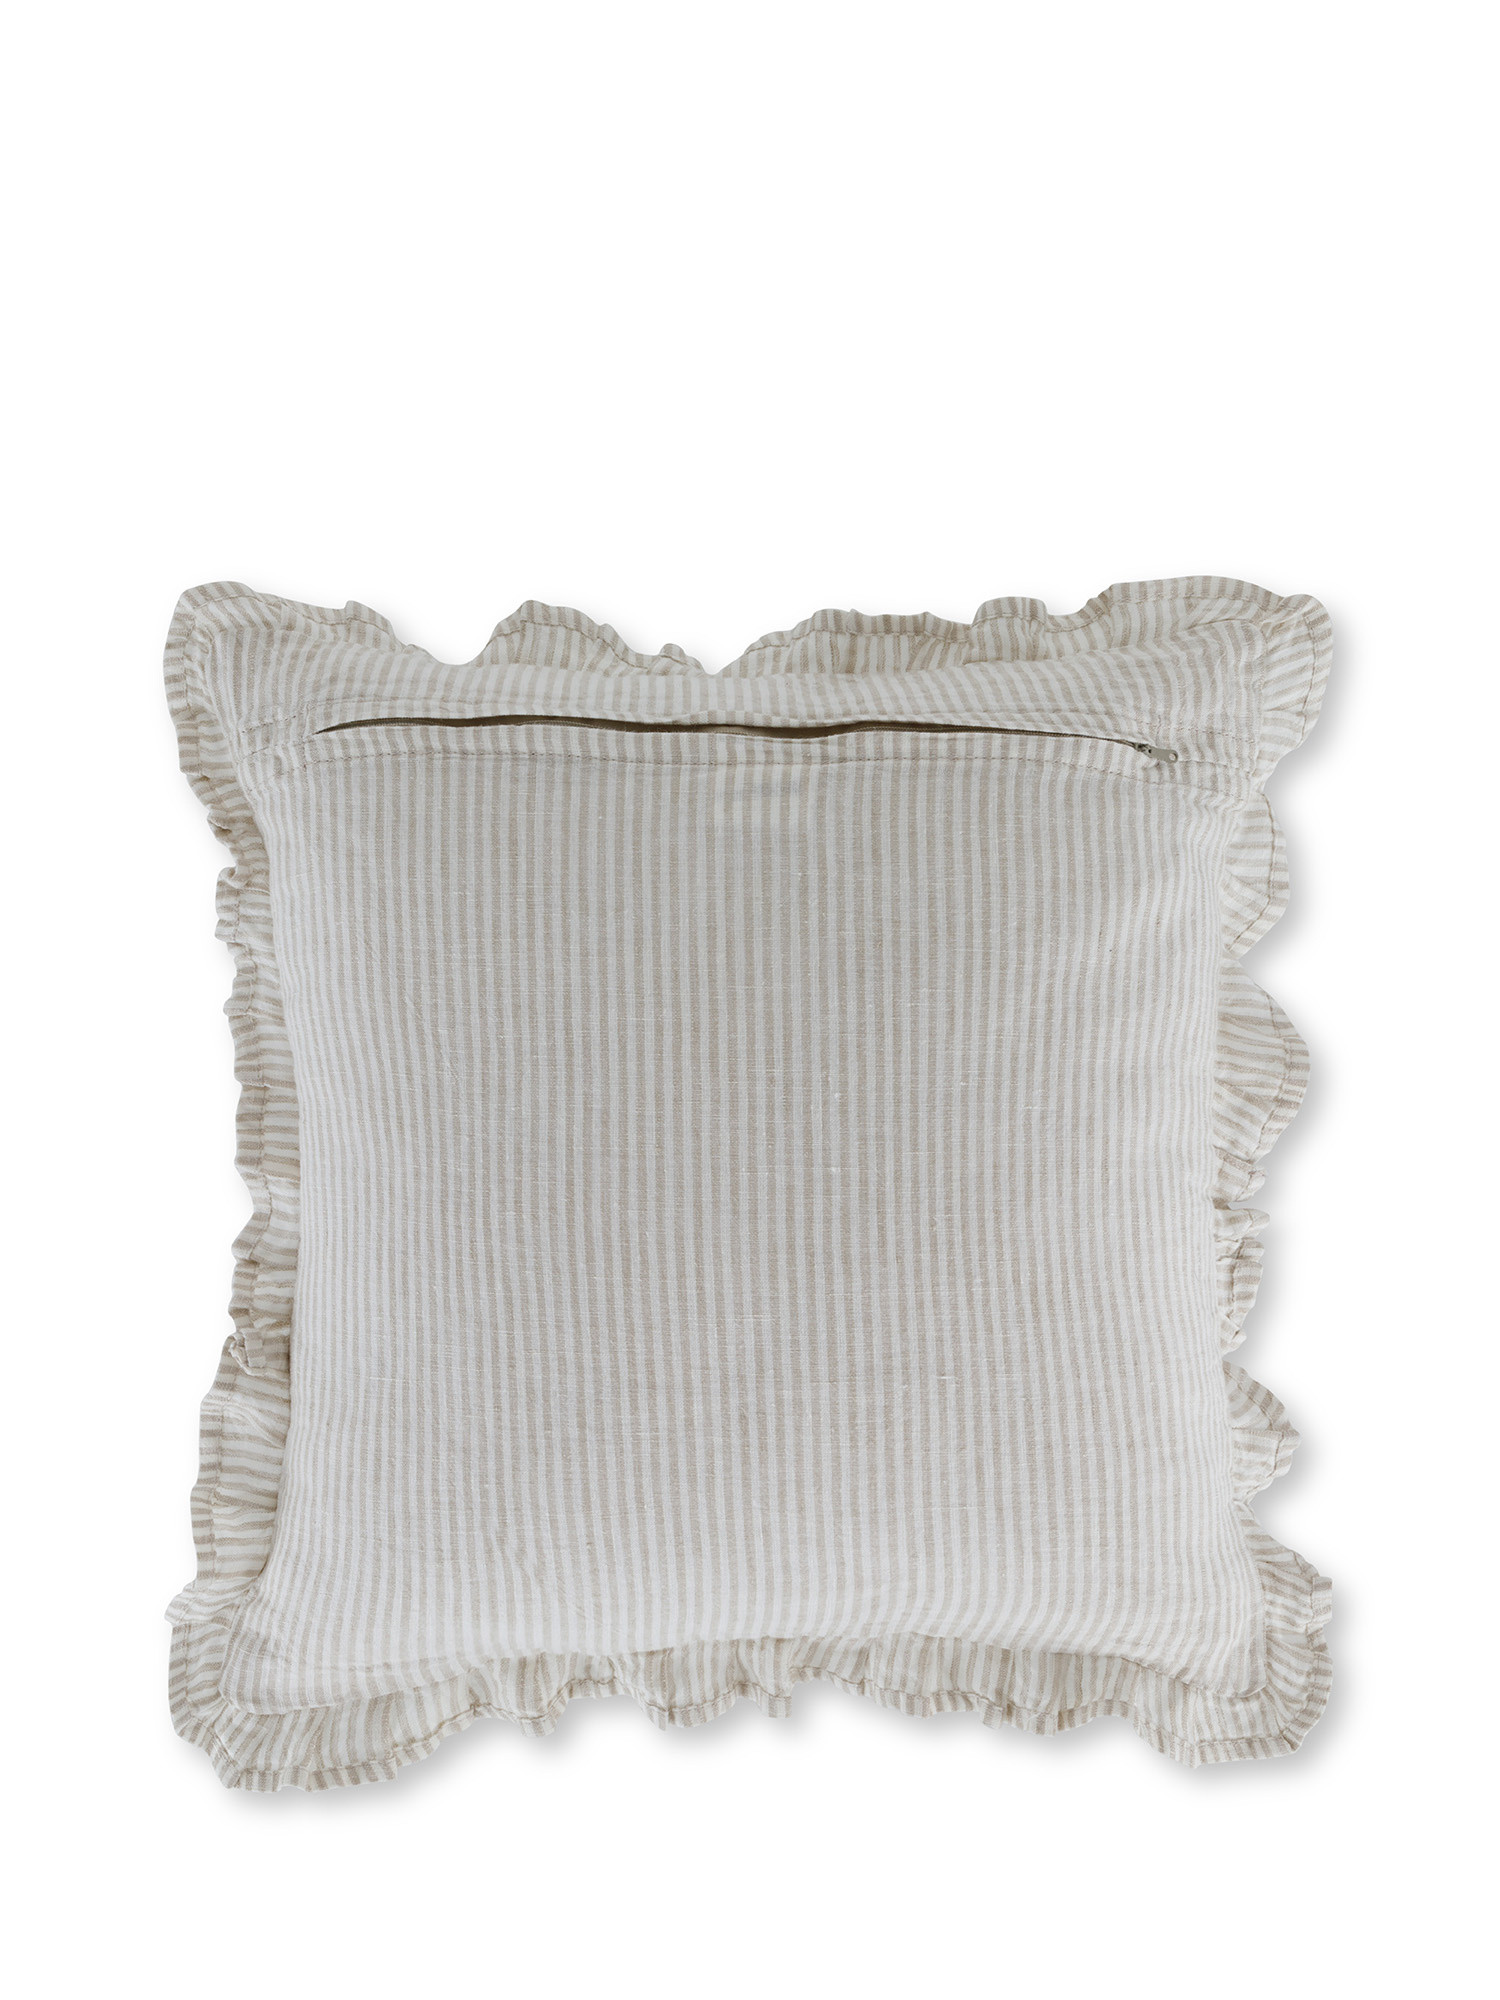 Striped cushion in pure linen 40x40 cm, Beige, large image number 1